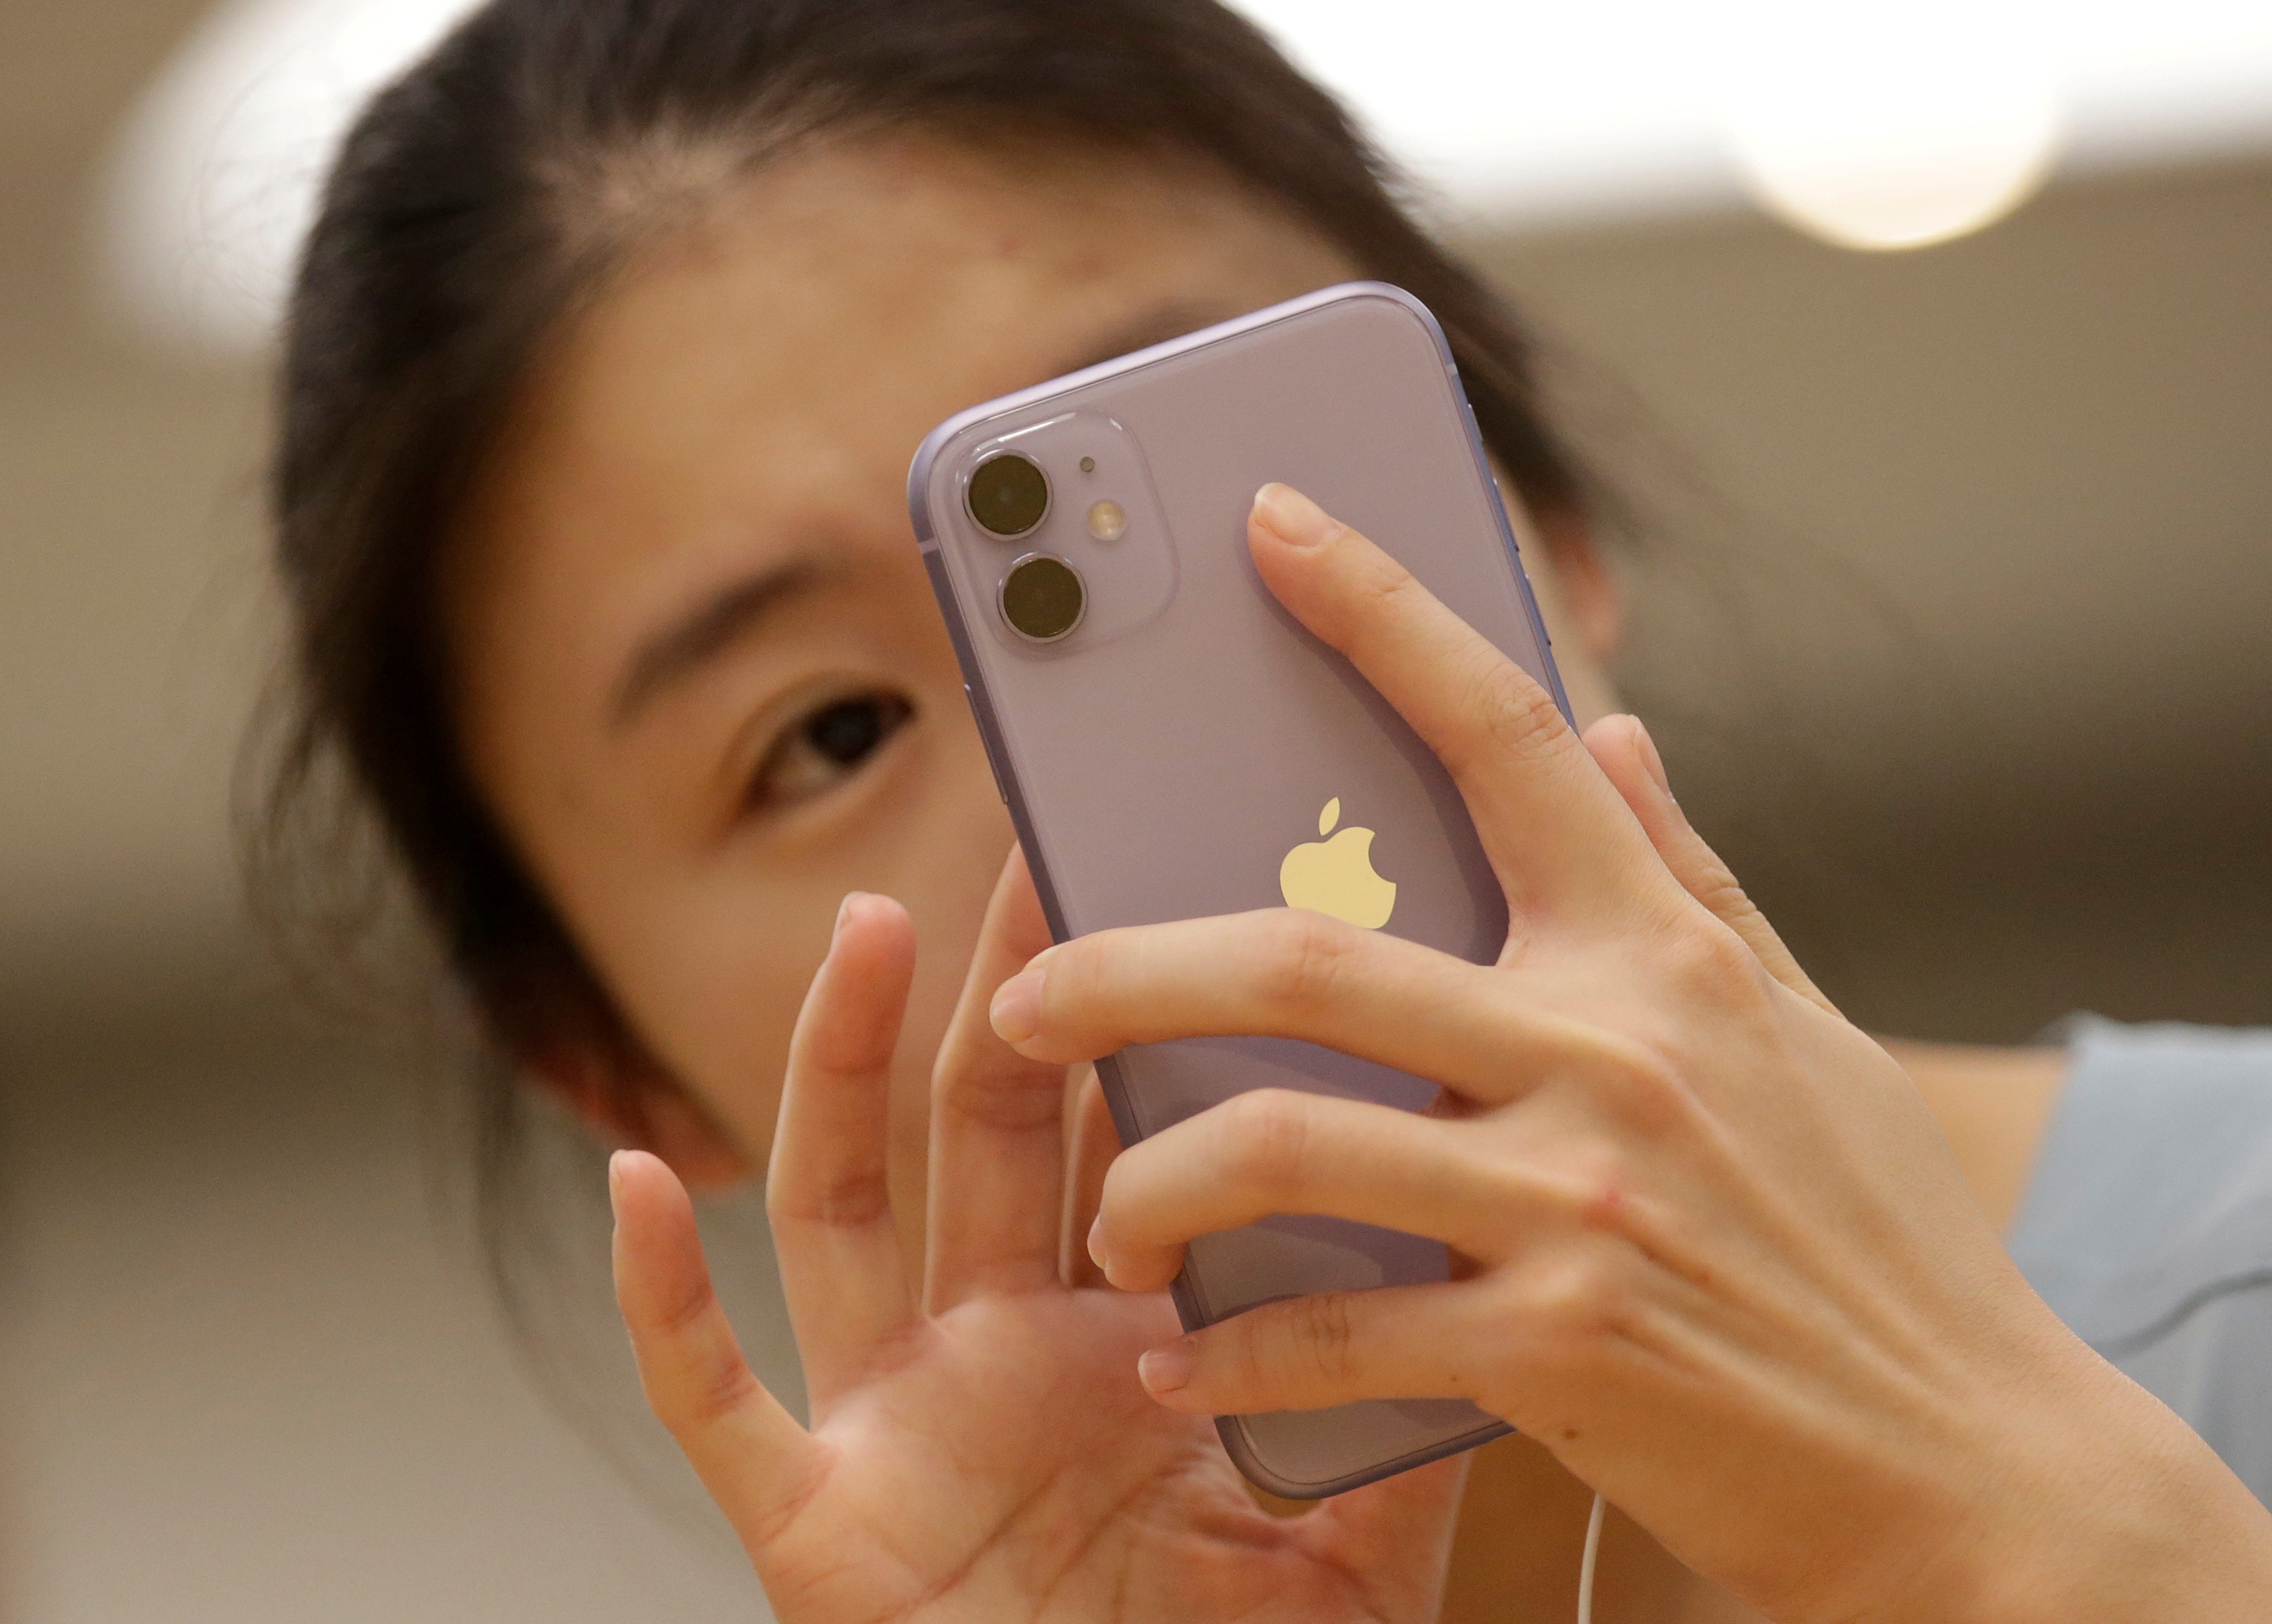 A customer tests Apple's iPhone 11 after it went on sale at the Apple Store in Beijing, September 20, 2019. Photo: Reuters